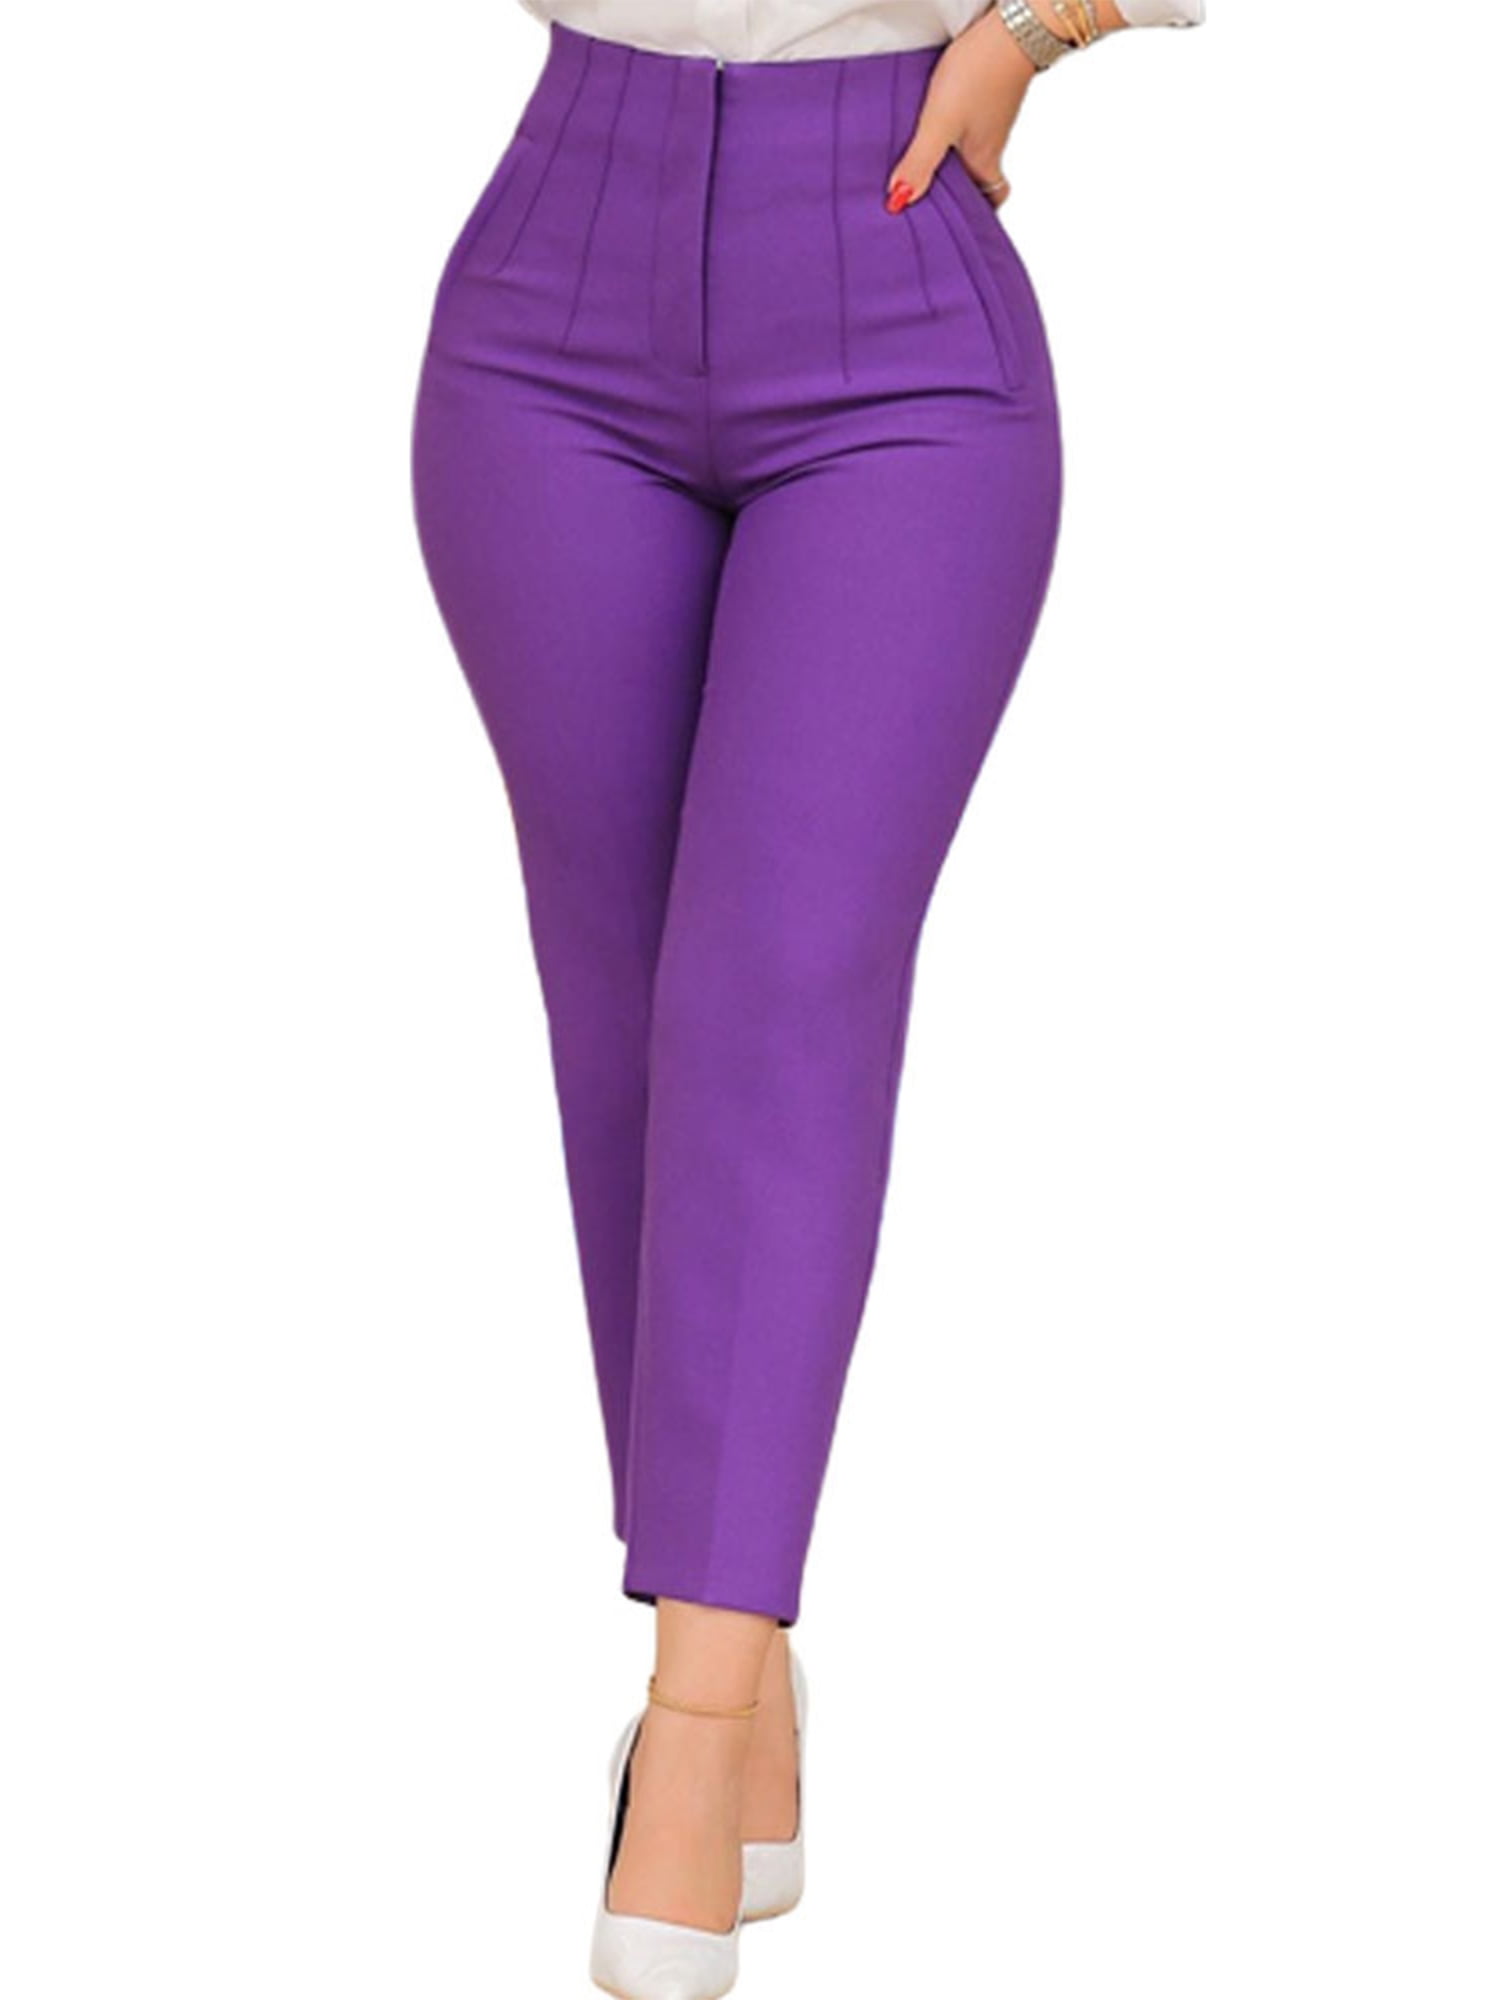 YUEEKEA Dress Pants for Women Business Casual Stretch High Waisted Pull On  Leggings Tummy Control Trousers with Pockets